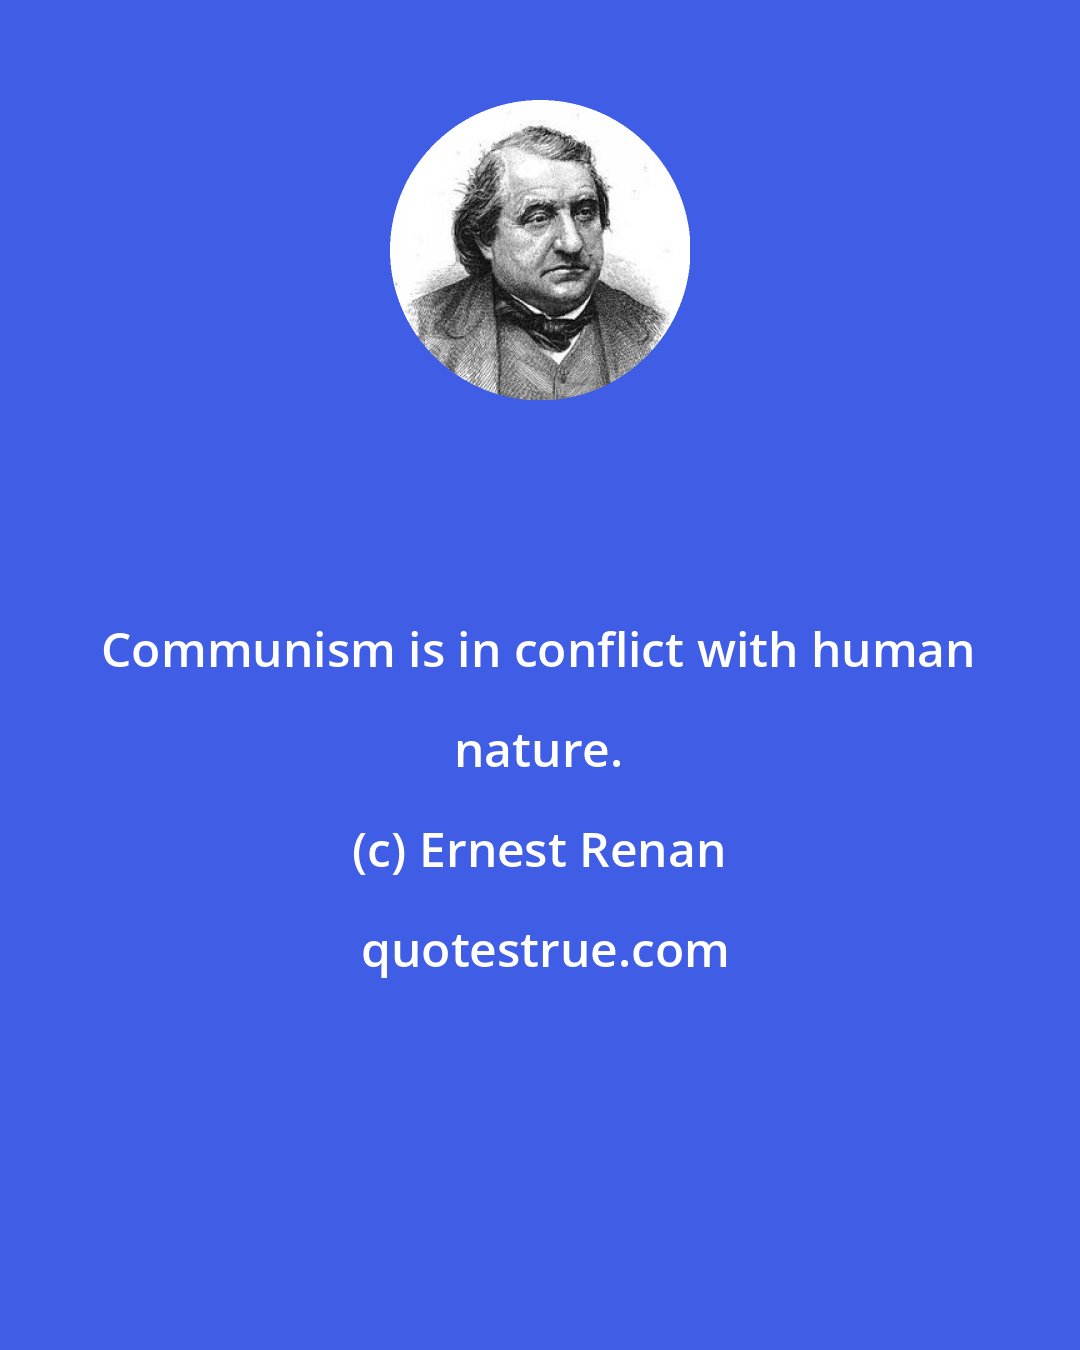 Ernest Renan: Communism is in conflict with human nature.